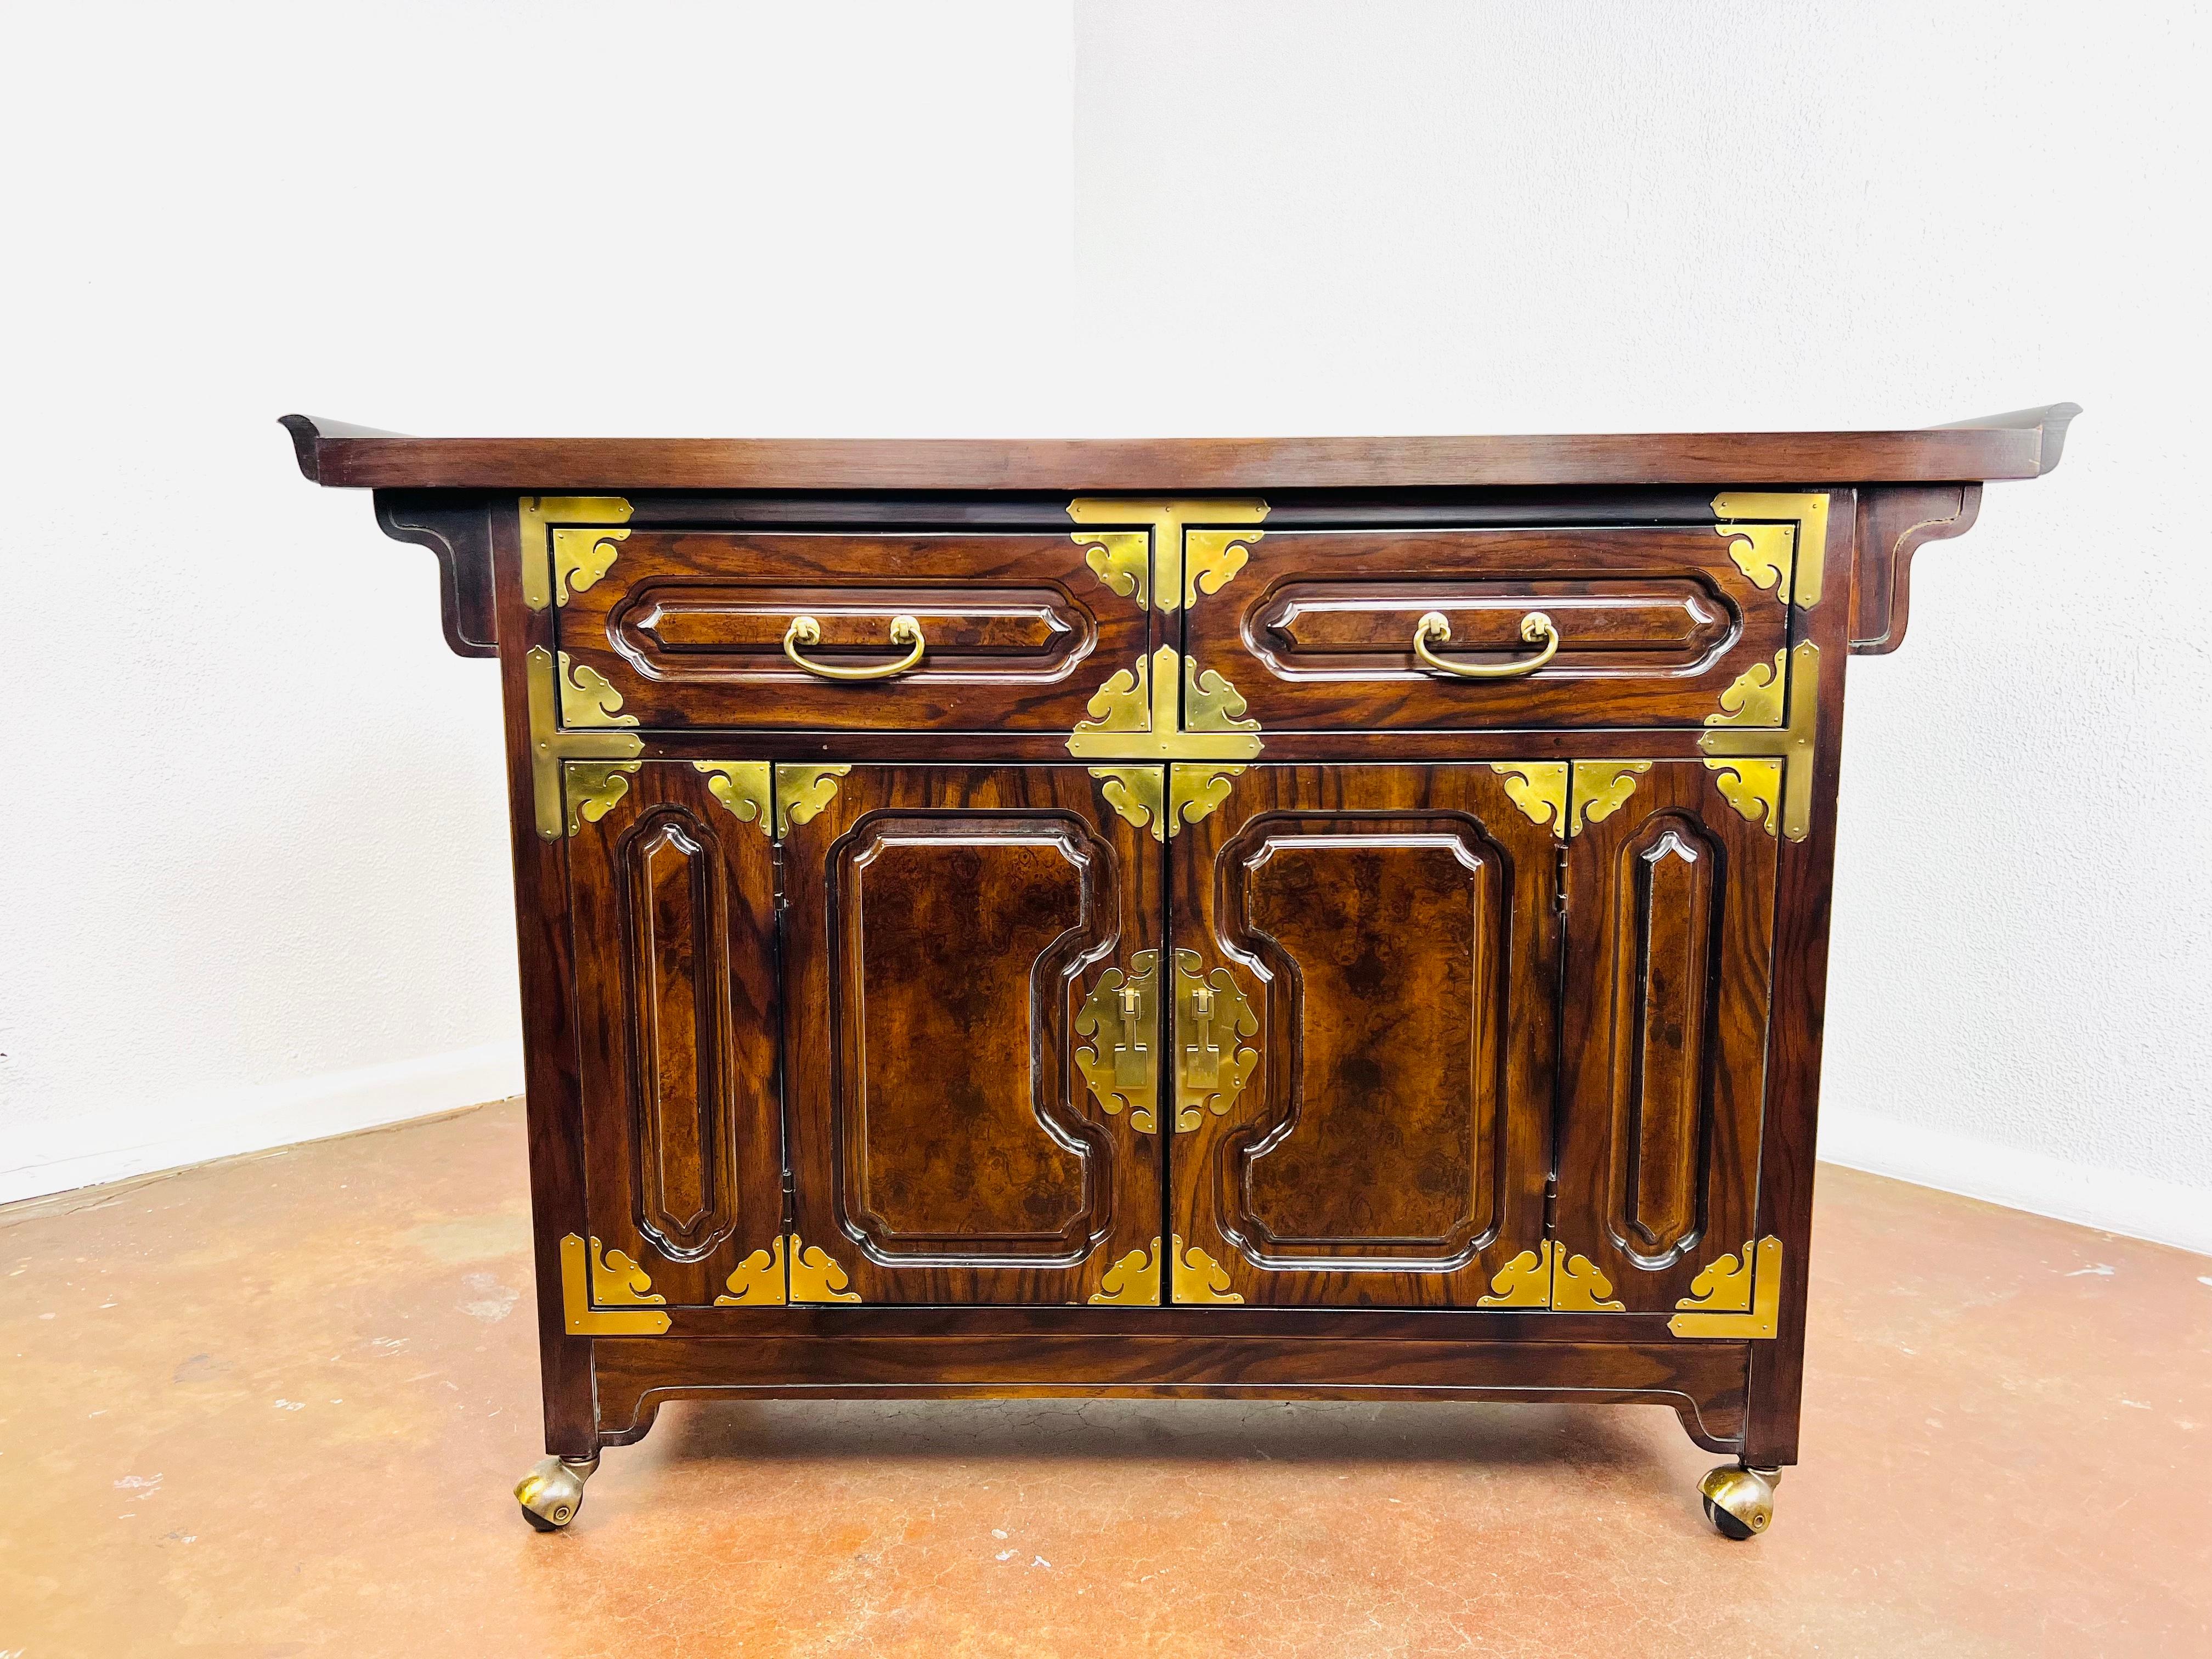 Vintage chinoiserie dry bar/server from the Pagoda Collection by Bernhardt. Features sturdy hardwood construction, beautiful lacquered burlwood, etched stone top surface, and two dovetailed drawers above two cabinet doors with brass hardware.